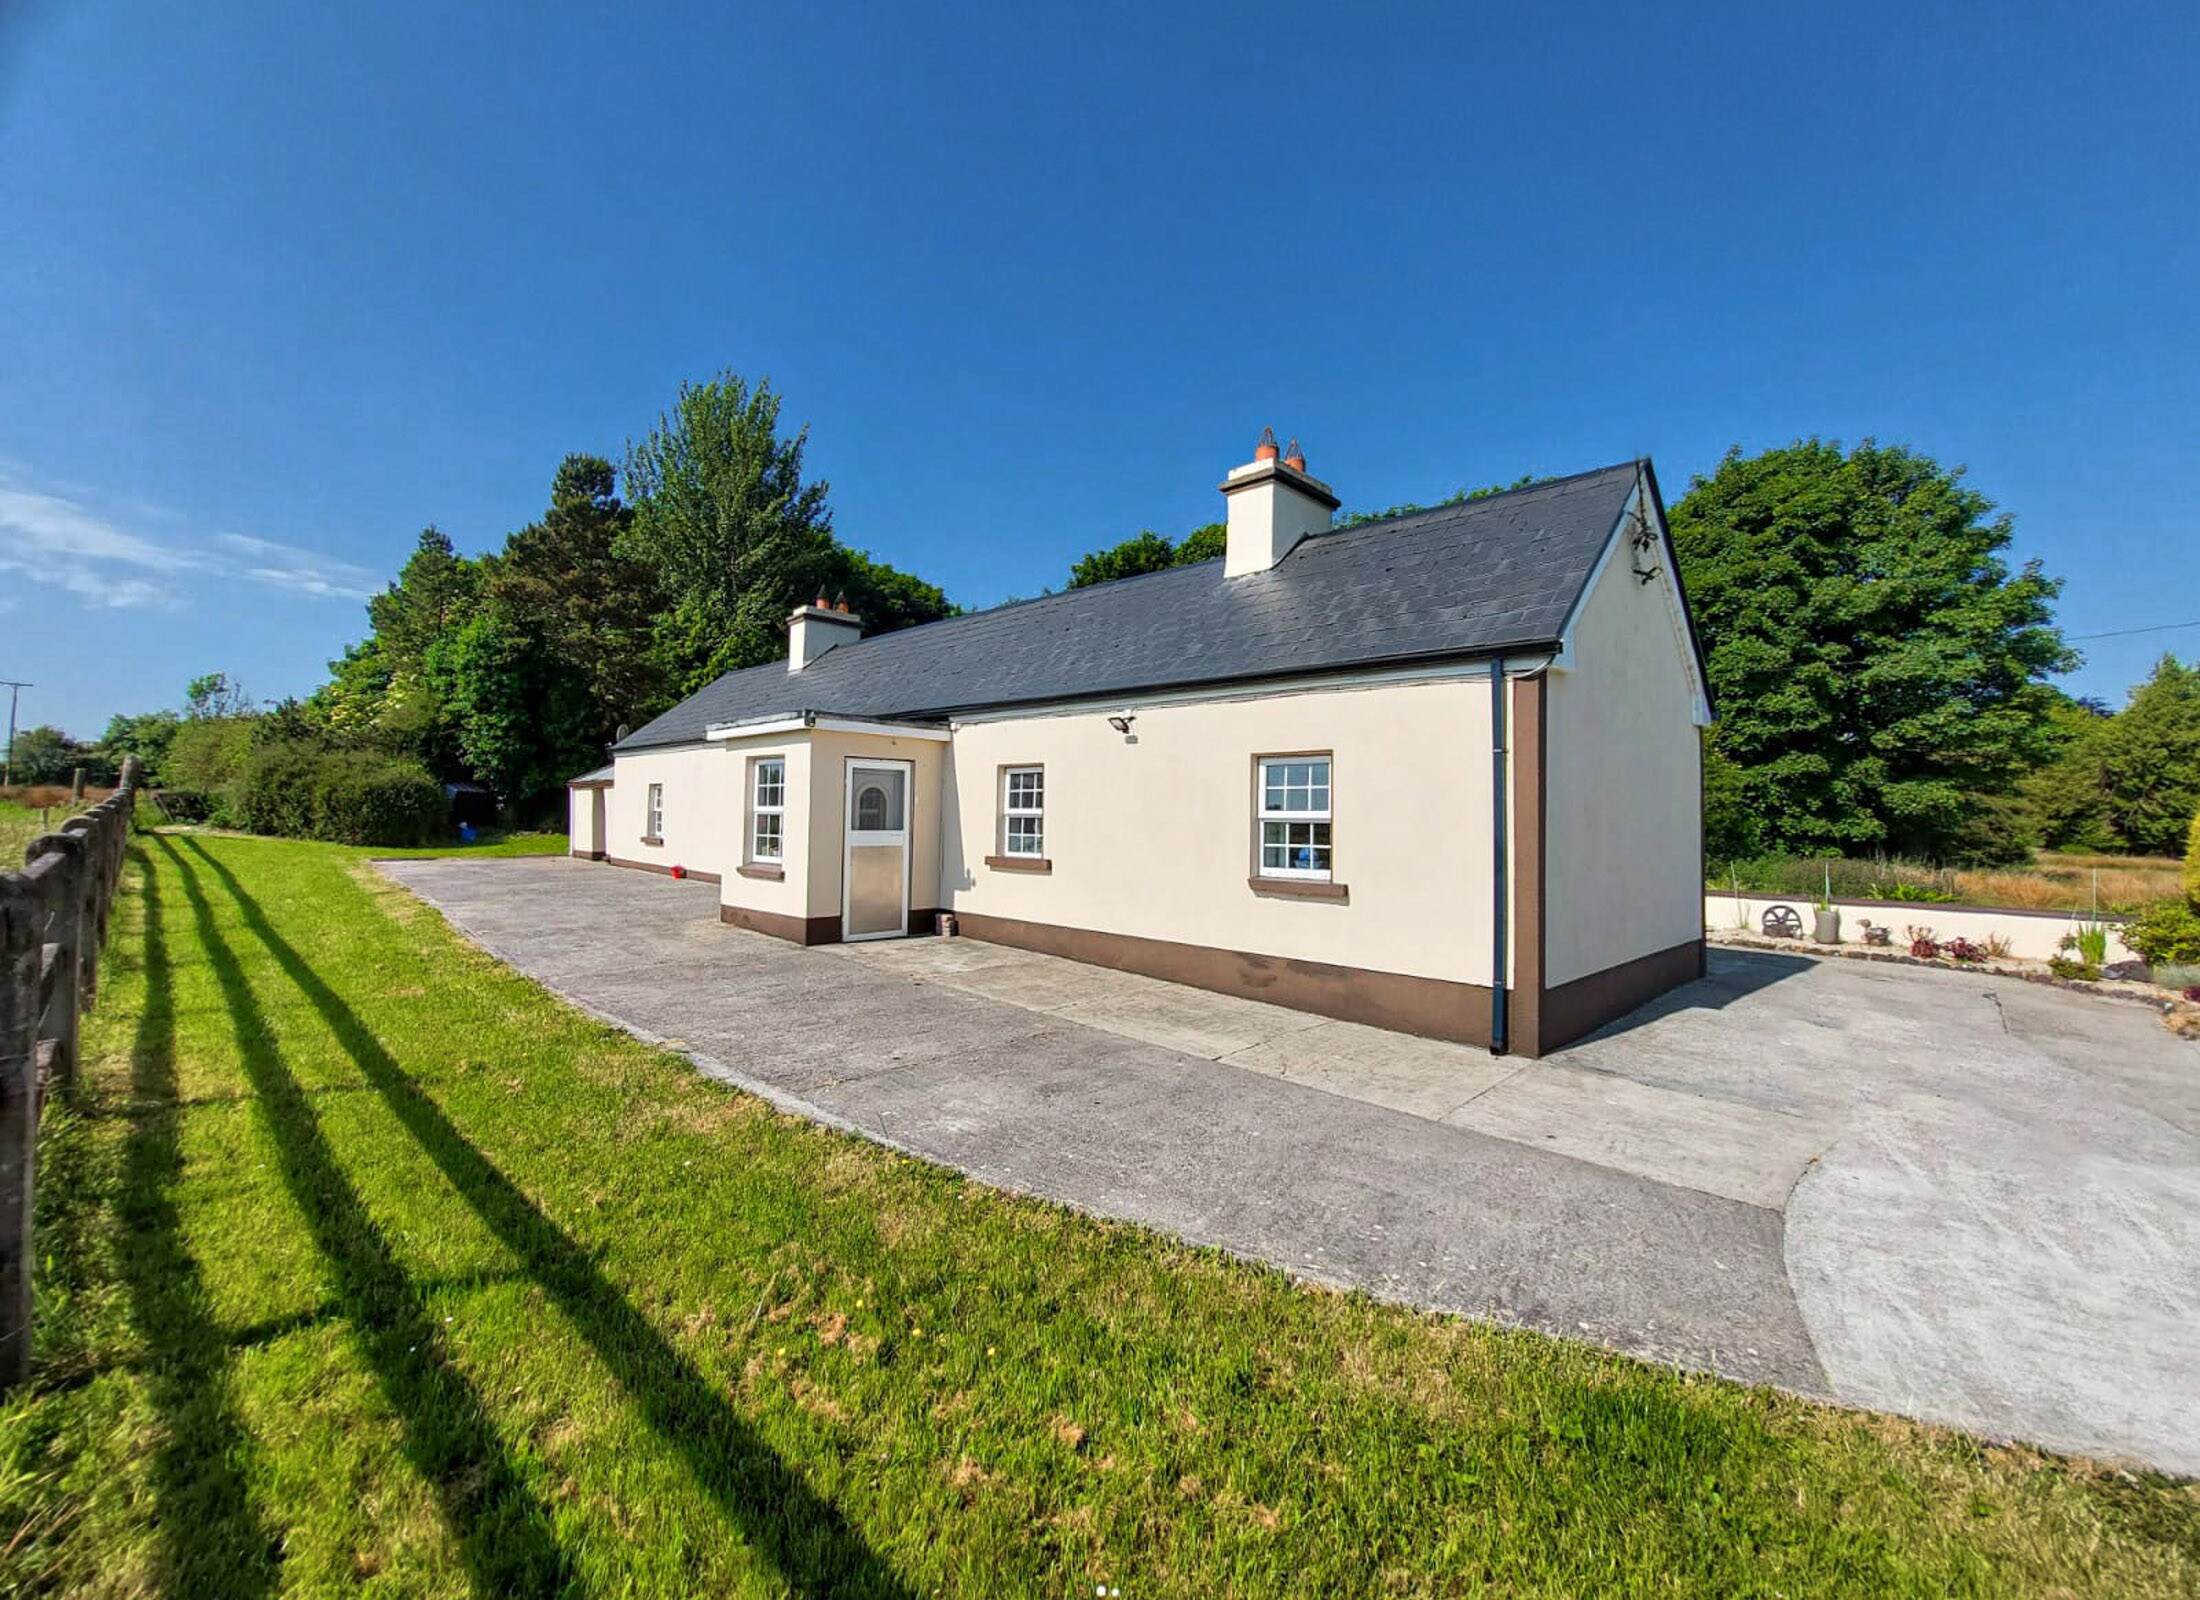 Farm View Cottage Castlerea, Castlerea, Co. Roscommon | Rural & quiet Self-Catering Holiday Accommodation Available in Castlerea, County Roscommon